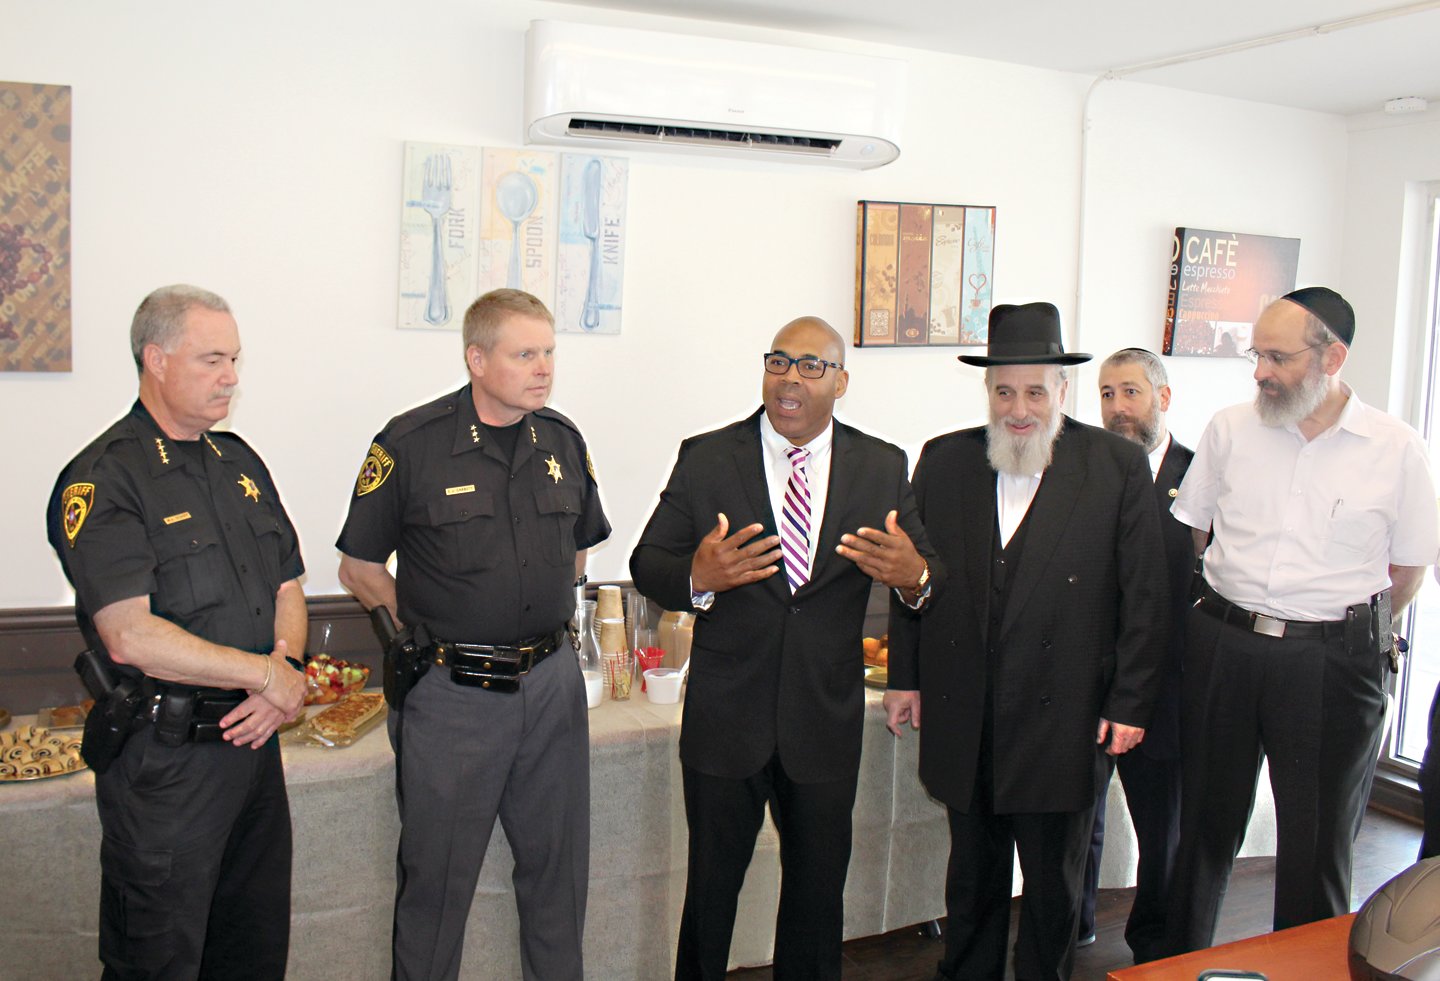 At right, Chief Williams speaks  during a “Coffee with the Sheriff” event in 2019.